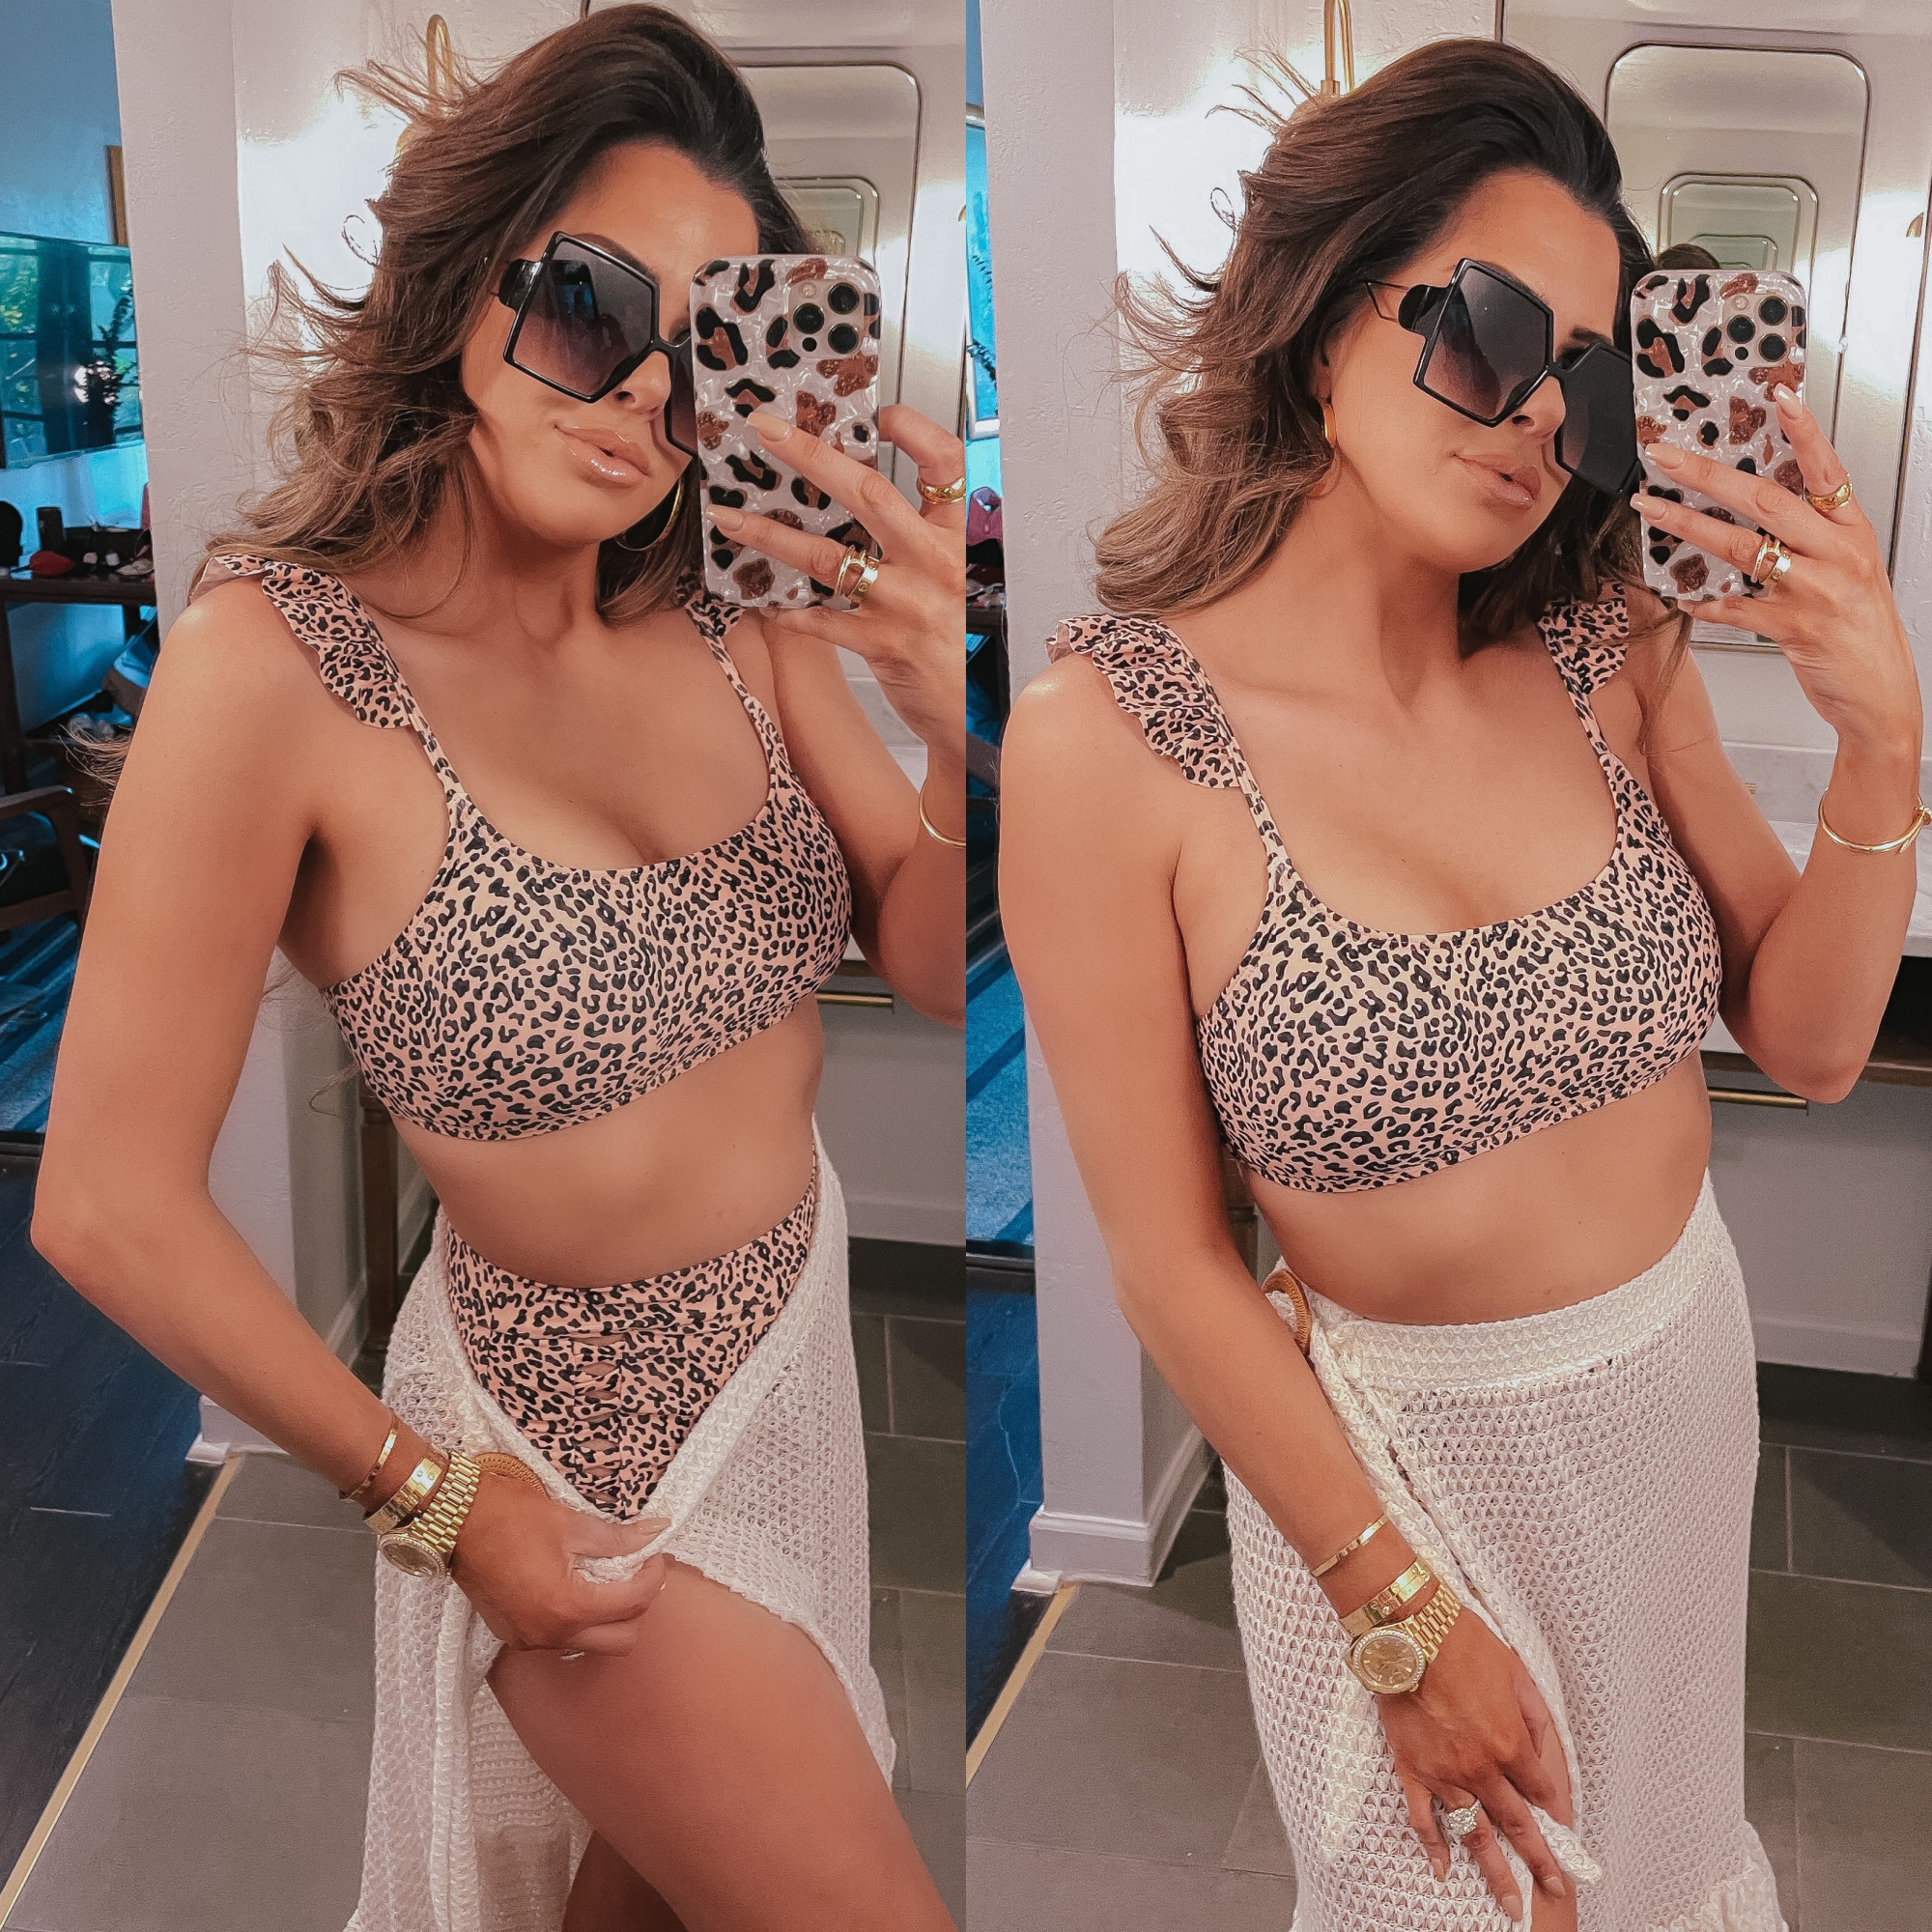 Amazon swimsuit review, best amazon two piece swimsuits, High waisted Amazon swimsuits emily gemma |Amazon High Waisted Swimsuit by popular US fashion blog, The Sweetest Thing: image of a Emily Gemma wearing a leopard print amazon two piece swimsuit and white knit wrap with square frame sunglasses. 